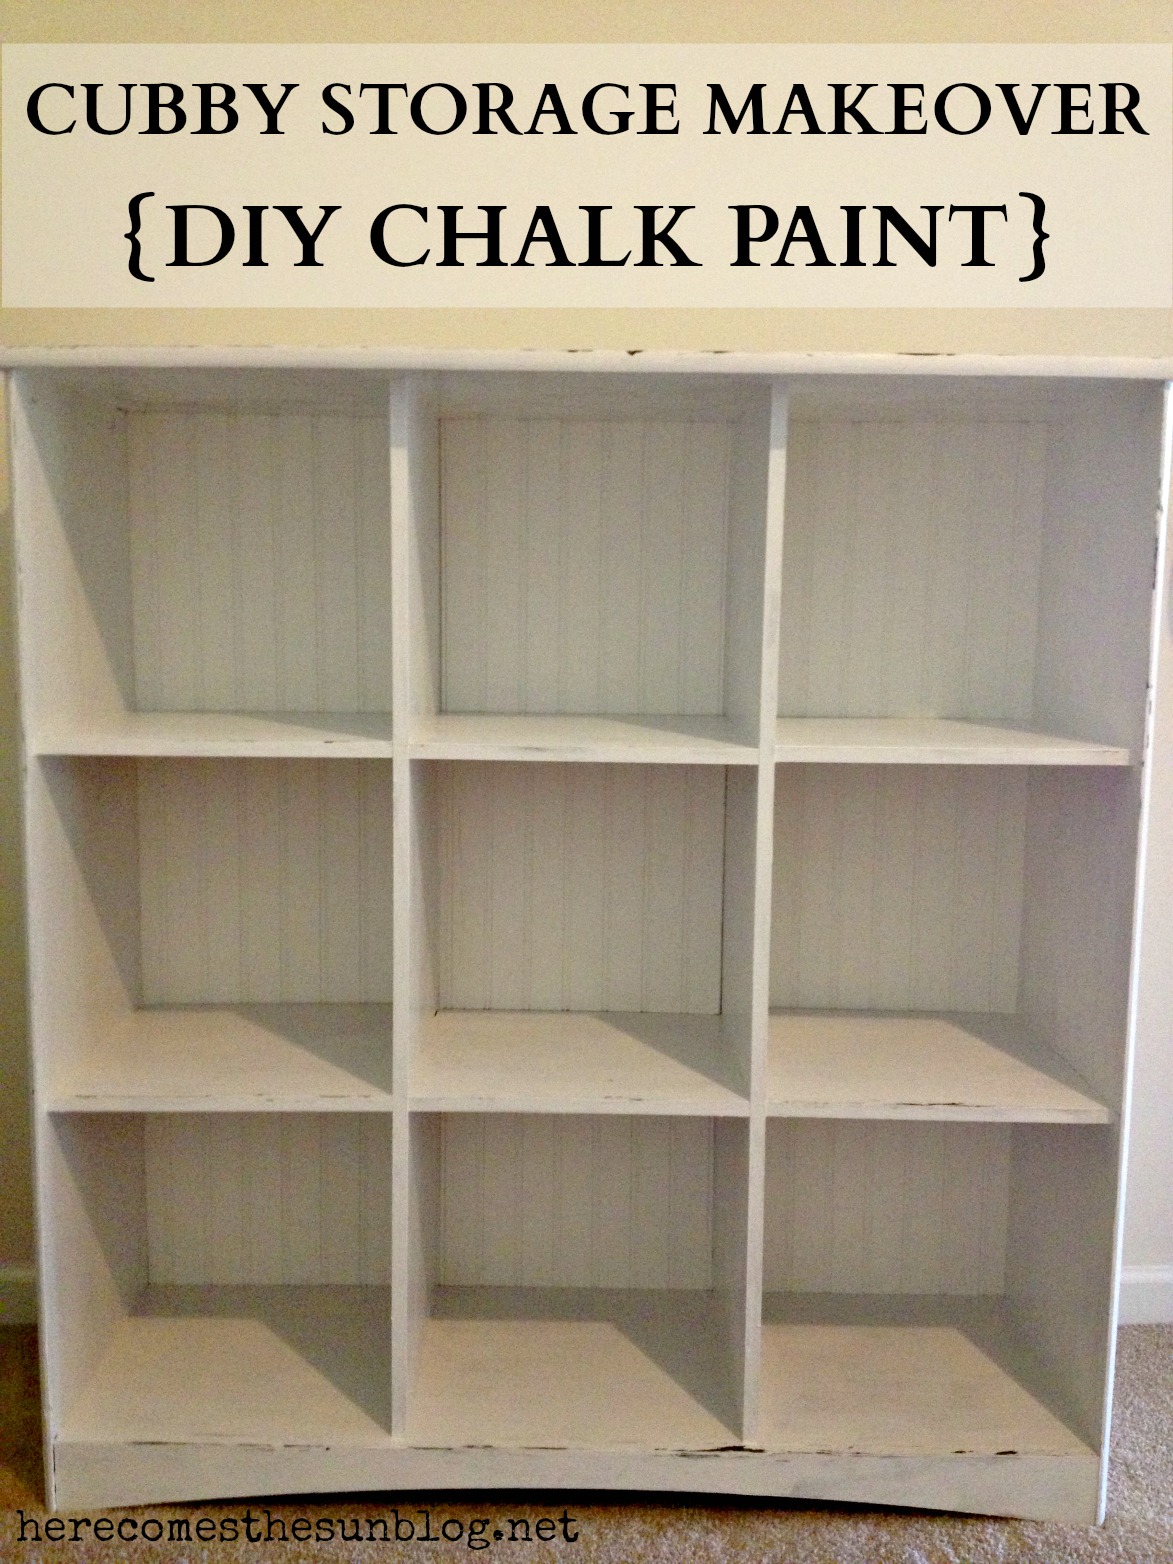 Cubby Storage Makeover {DIY Chalk Paint} - Here Comes The Sun